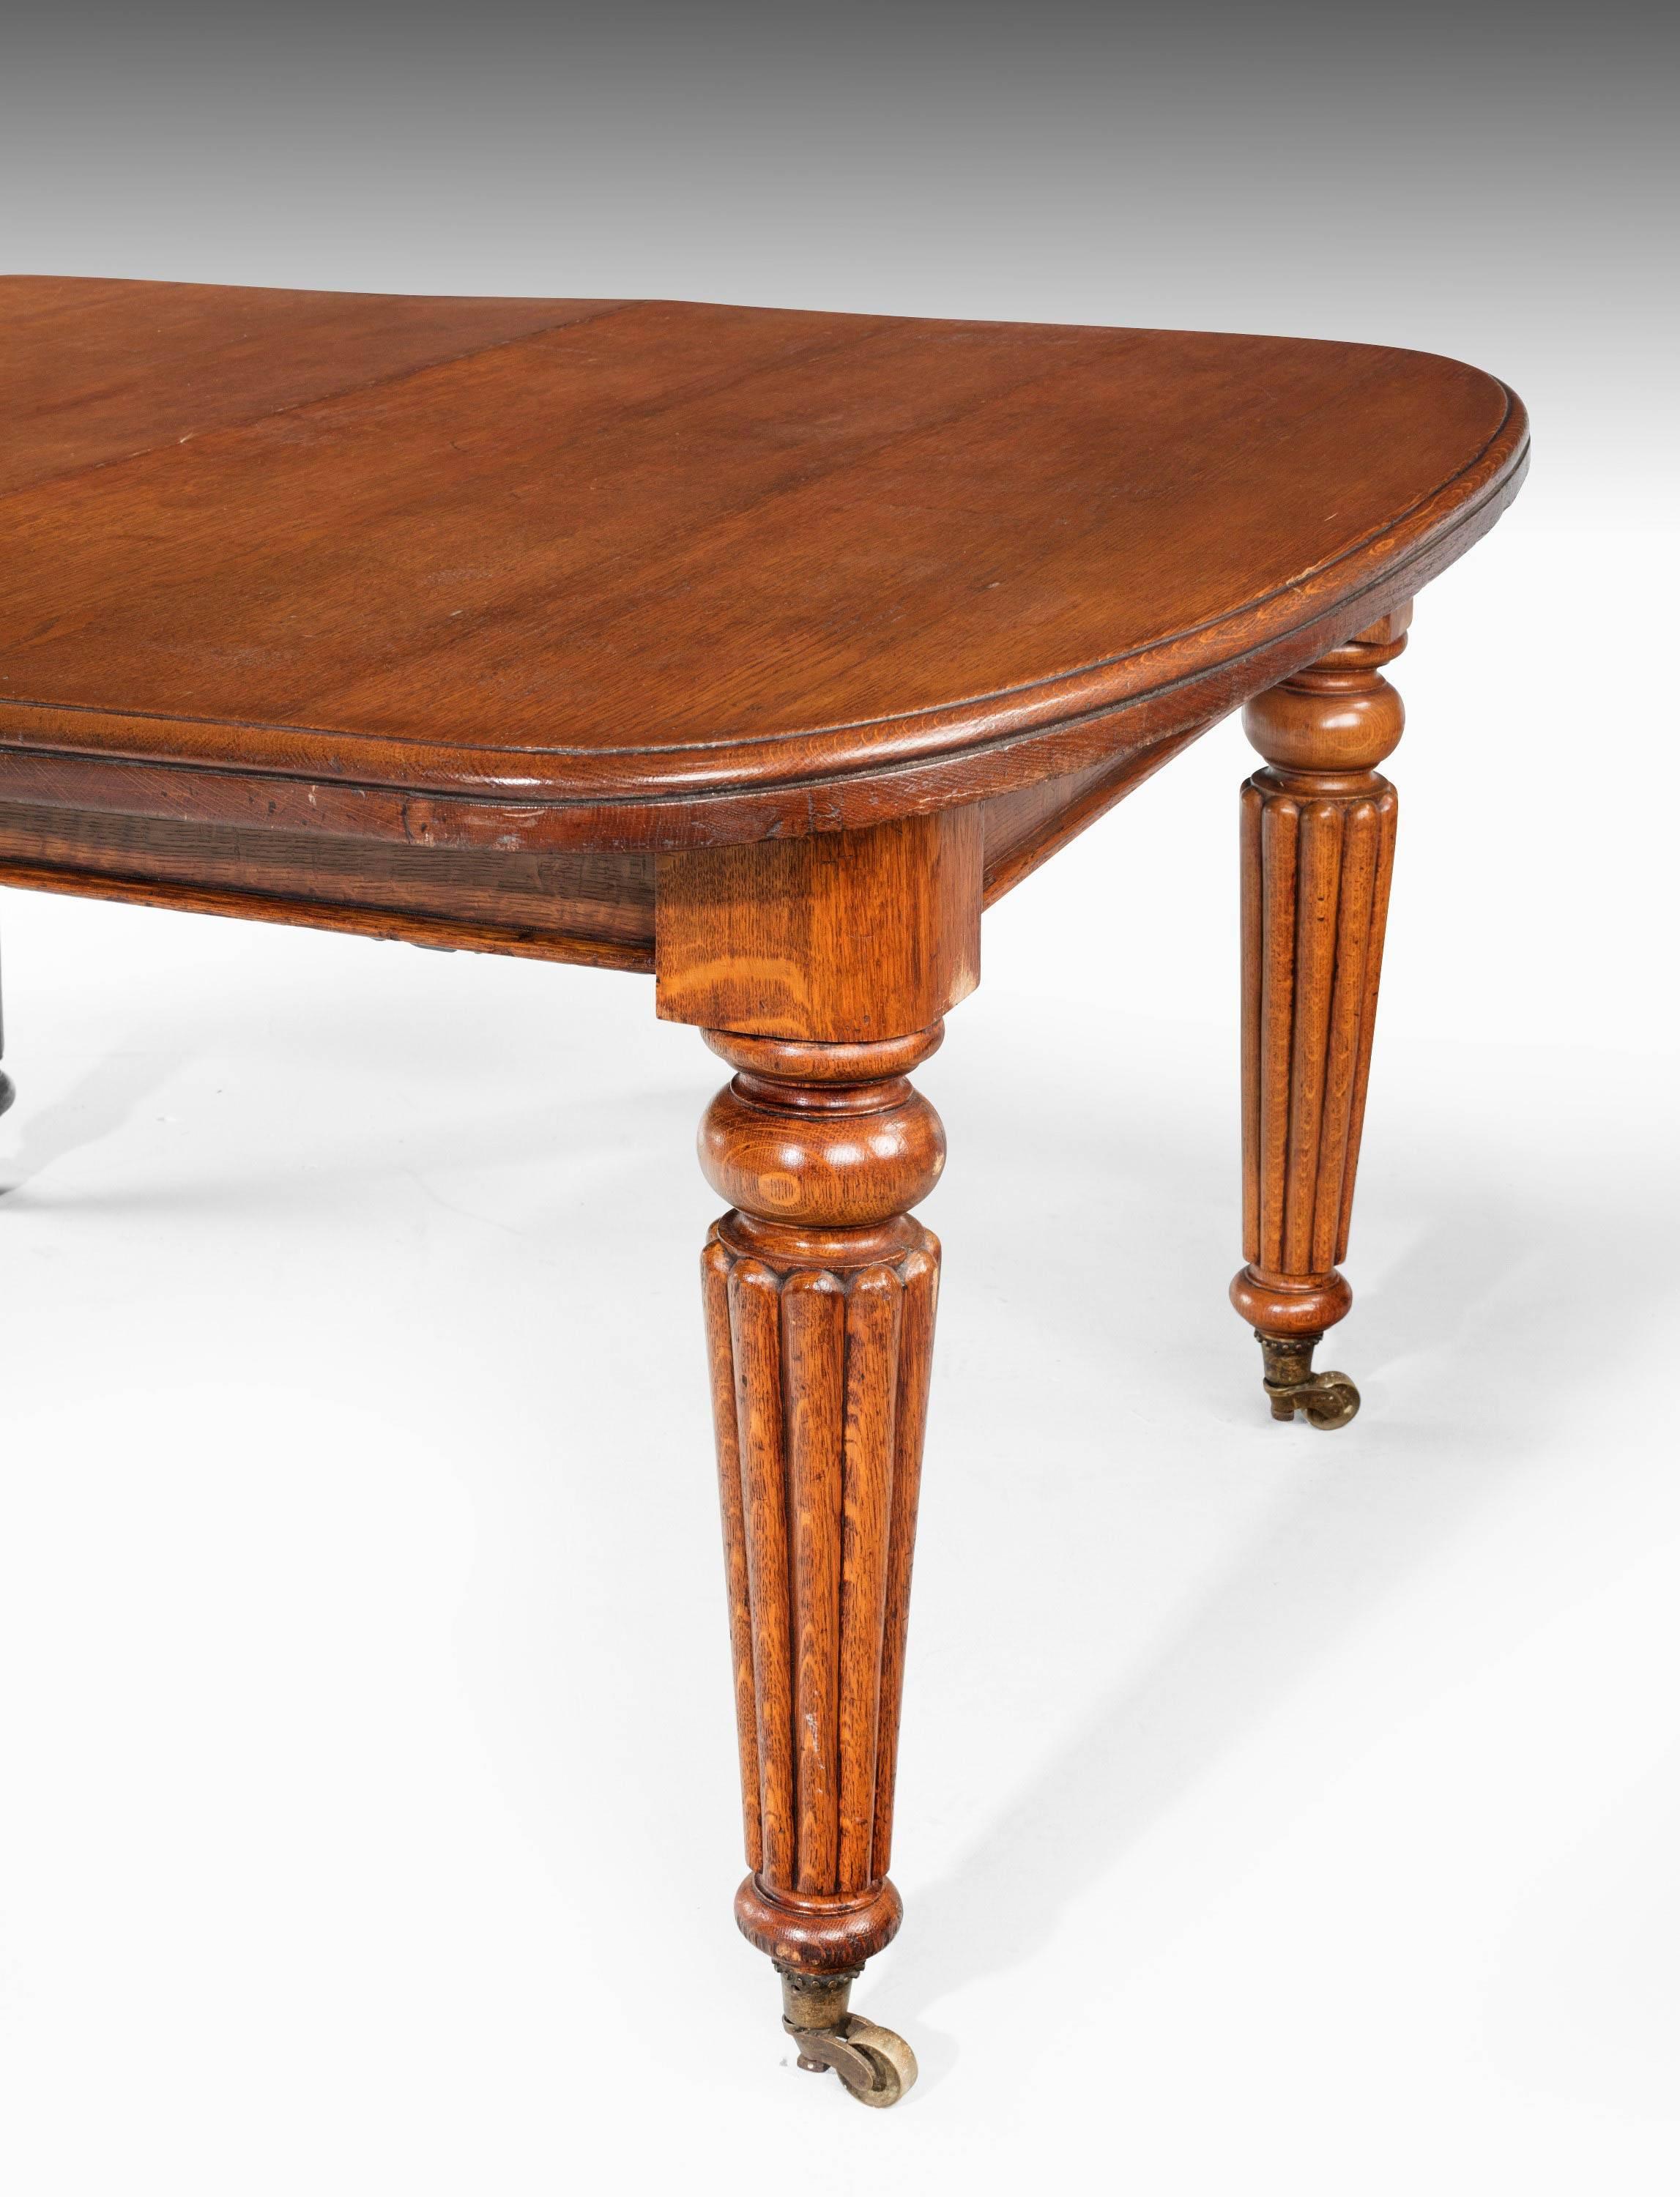 19th Century Late Regency Period Mahogany Extending Dining Table with Reeded Decoration